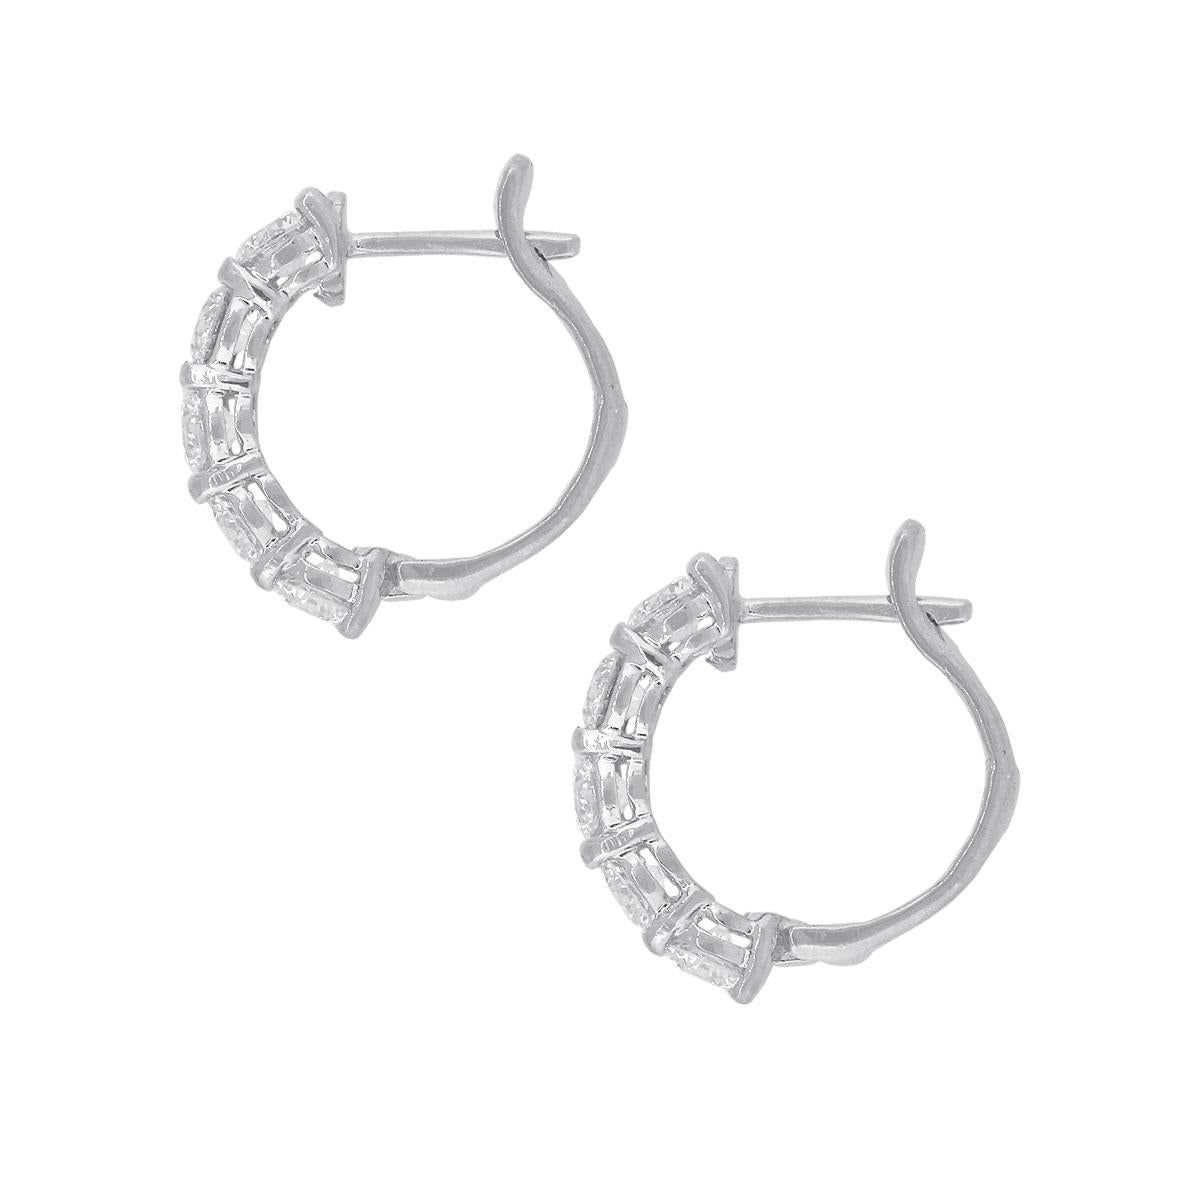 Material: 14k white gold
Diamond Details: Approx. 1.78ctw of round cut diamonds. Diamonds are G/H in color and VS in clarity
Earring Measurements: 0.62